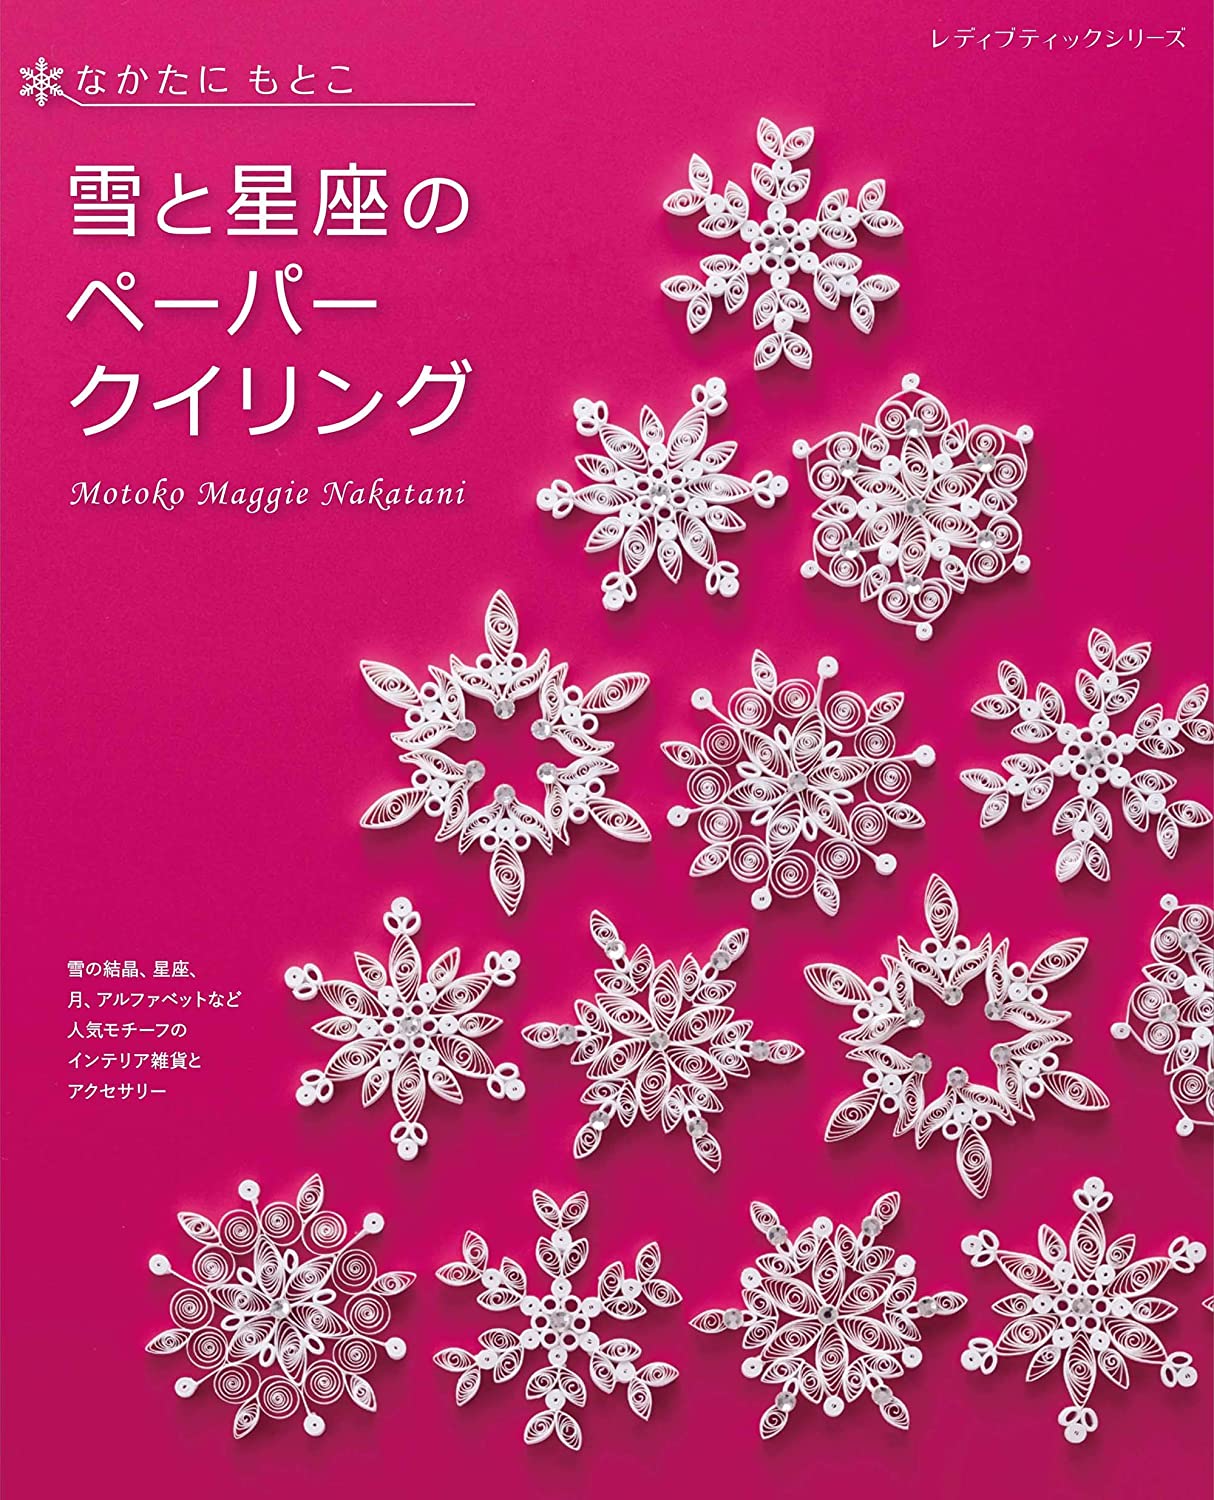 Paper quilling of snow and constellations